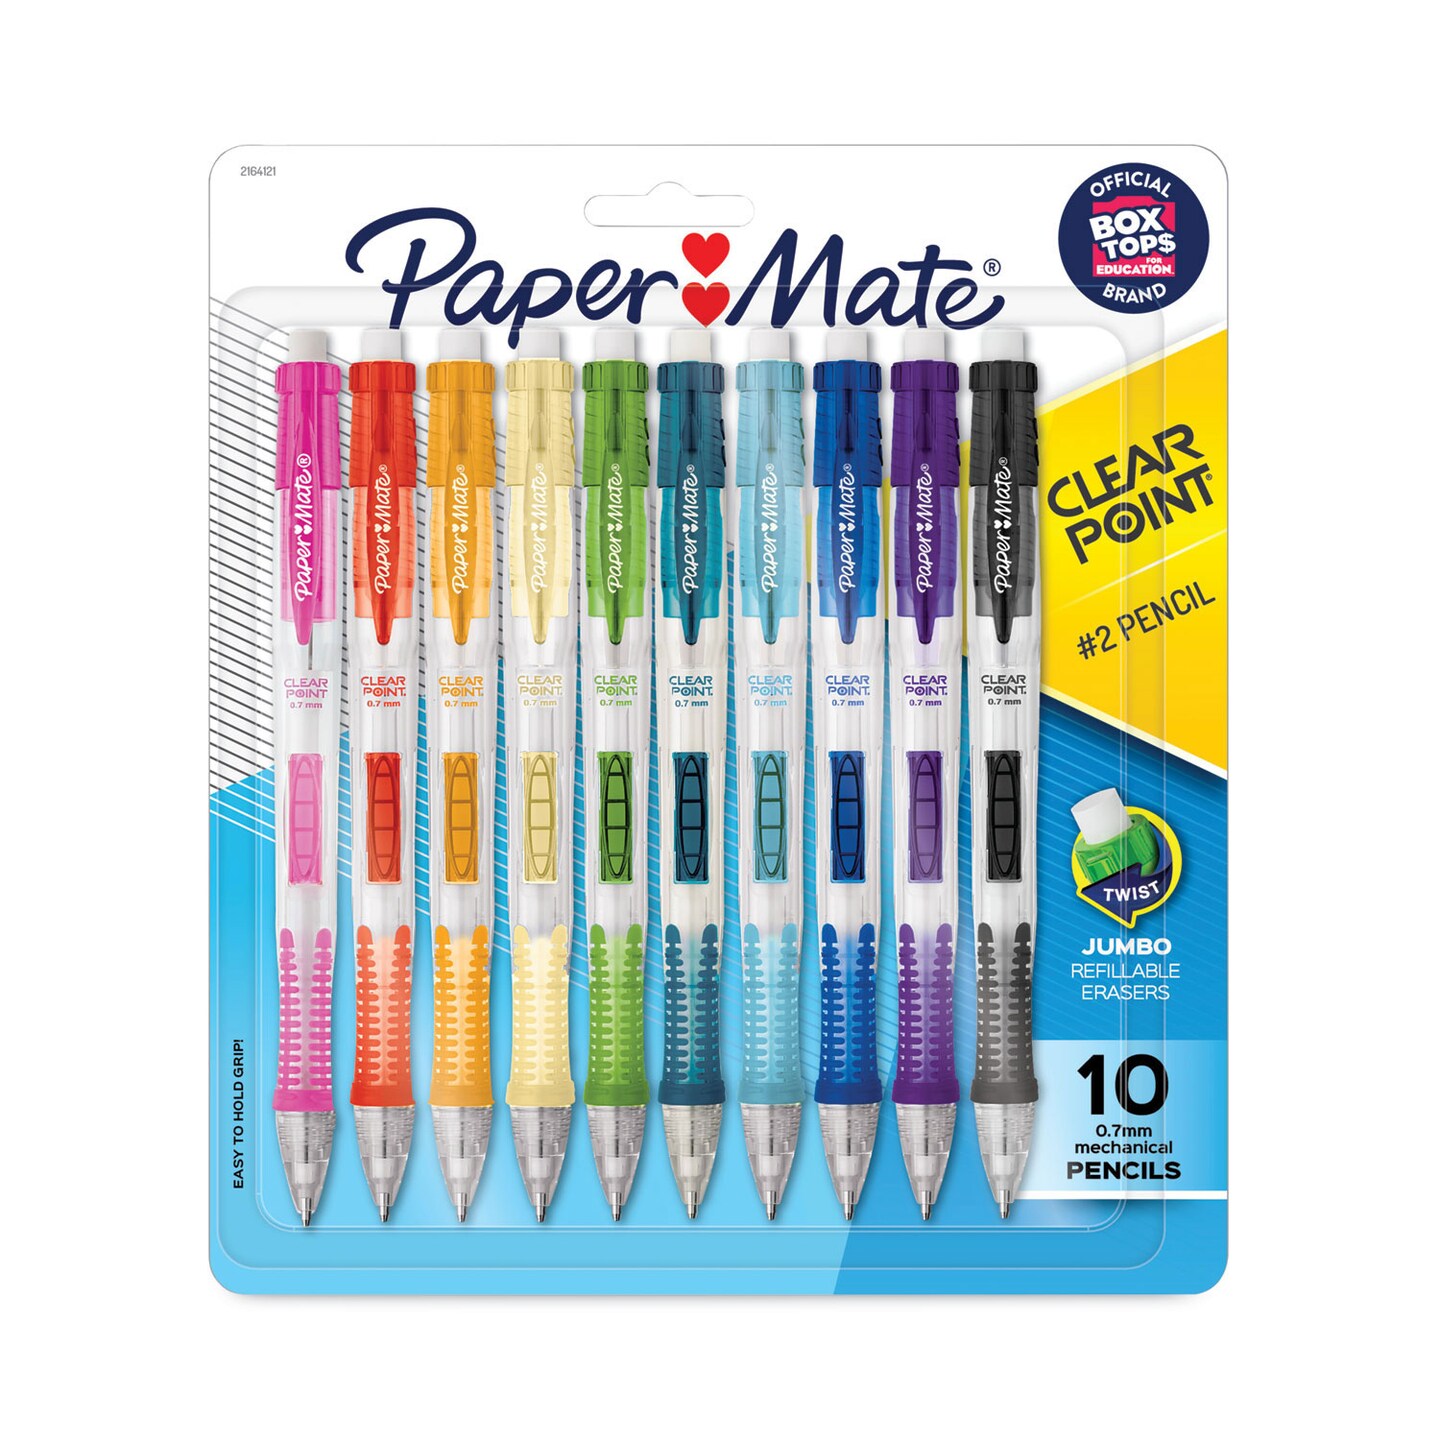 Papermate&#x26;reg; Clear Point Mechanical Pencil, 0.7 mm, HB (#2), Black Lead, Assorted Barrel Colors, 10/Pack